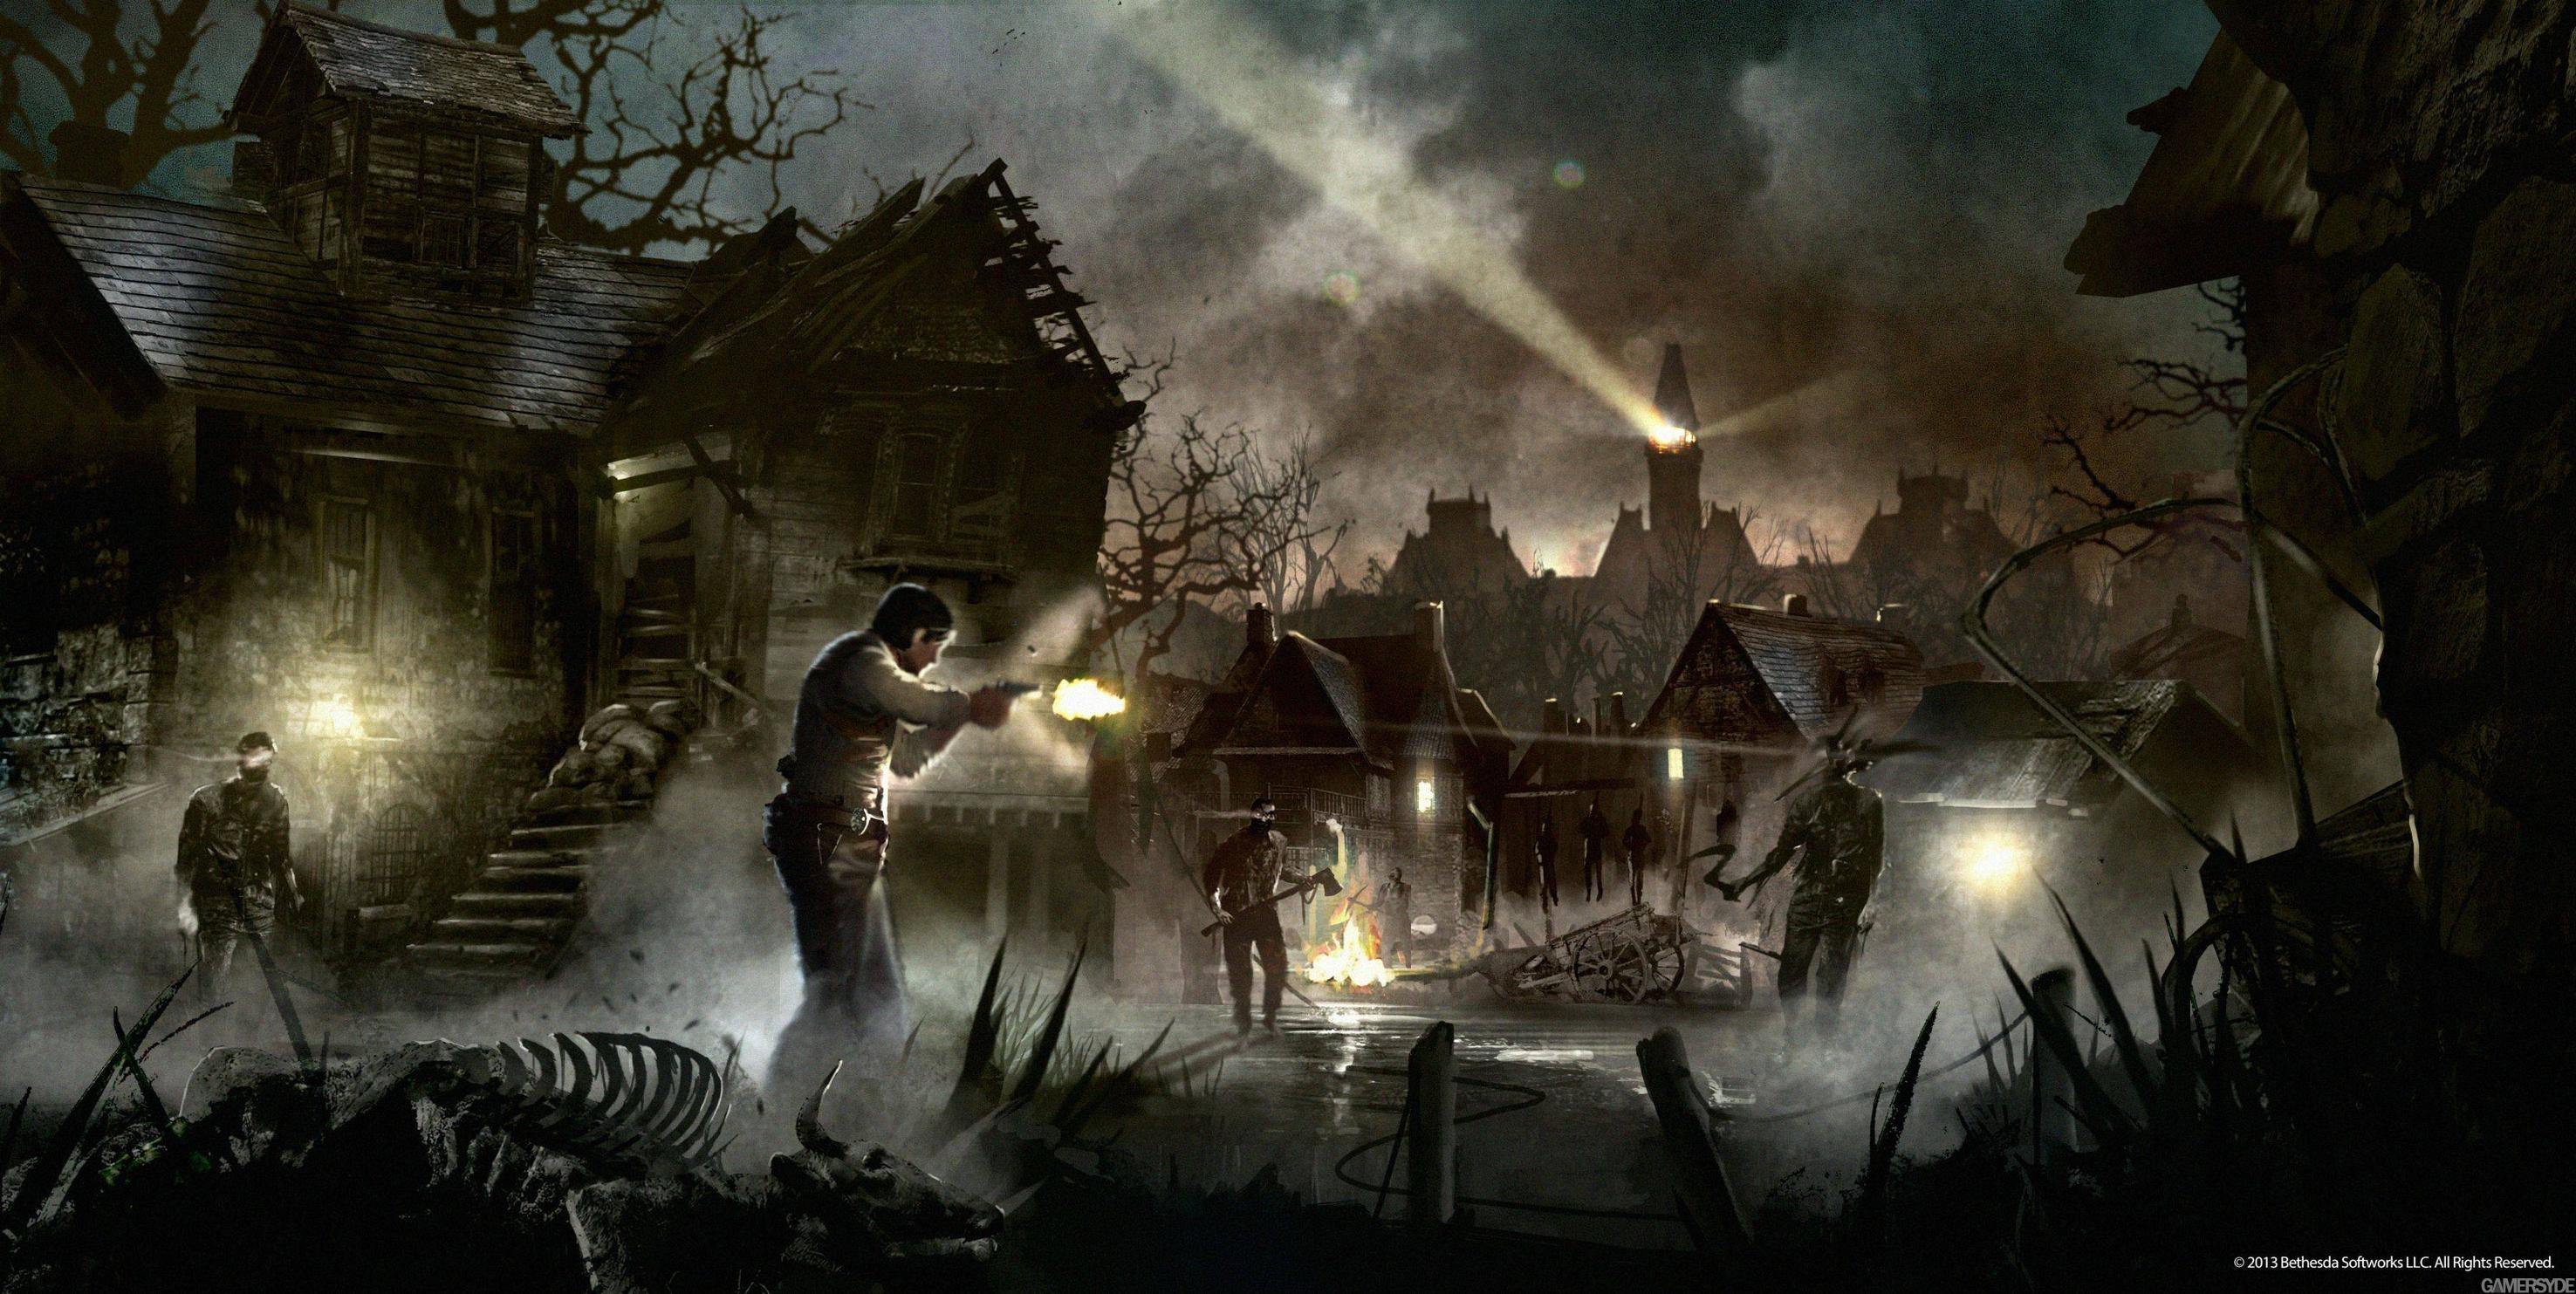 image_the_evil_within-21914-2706_0001